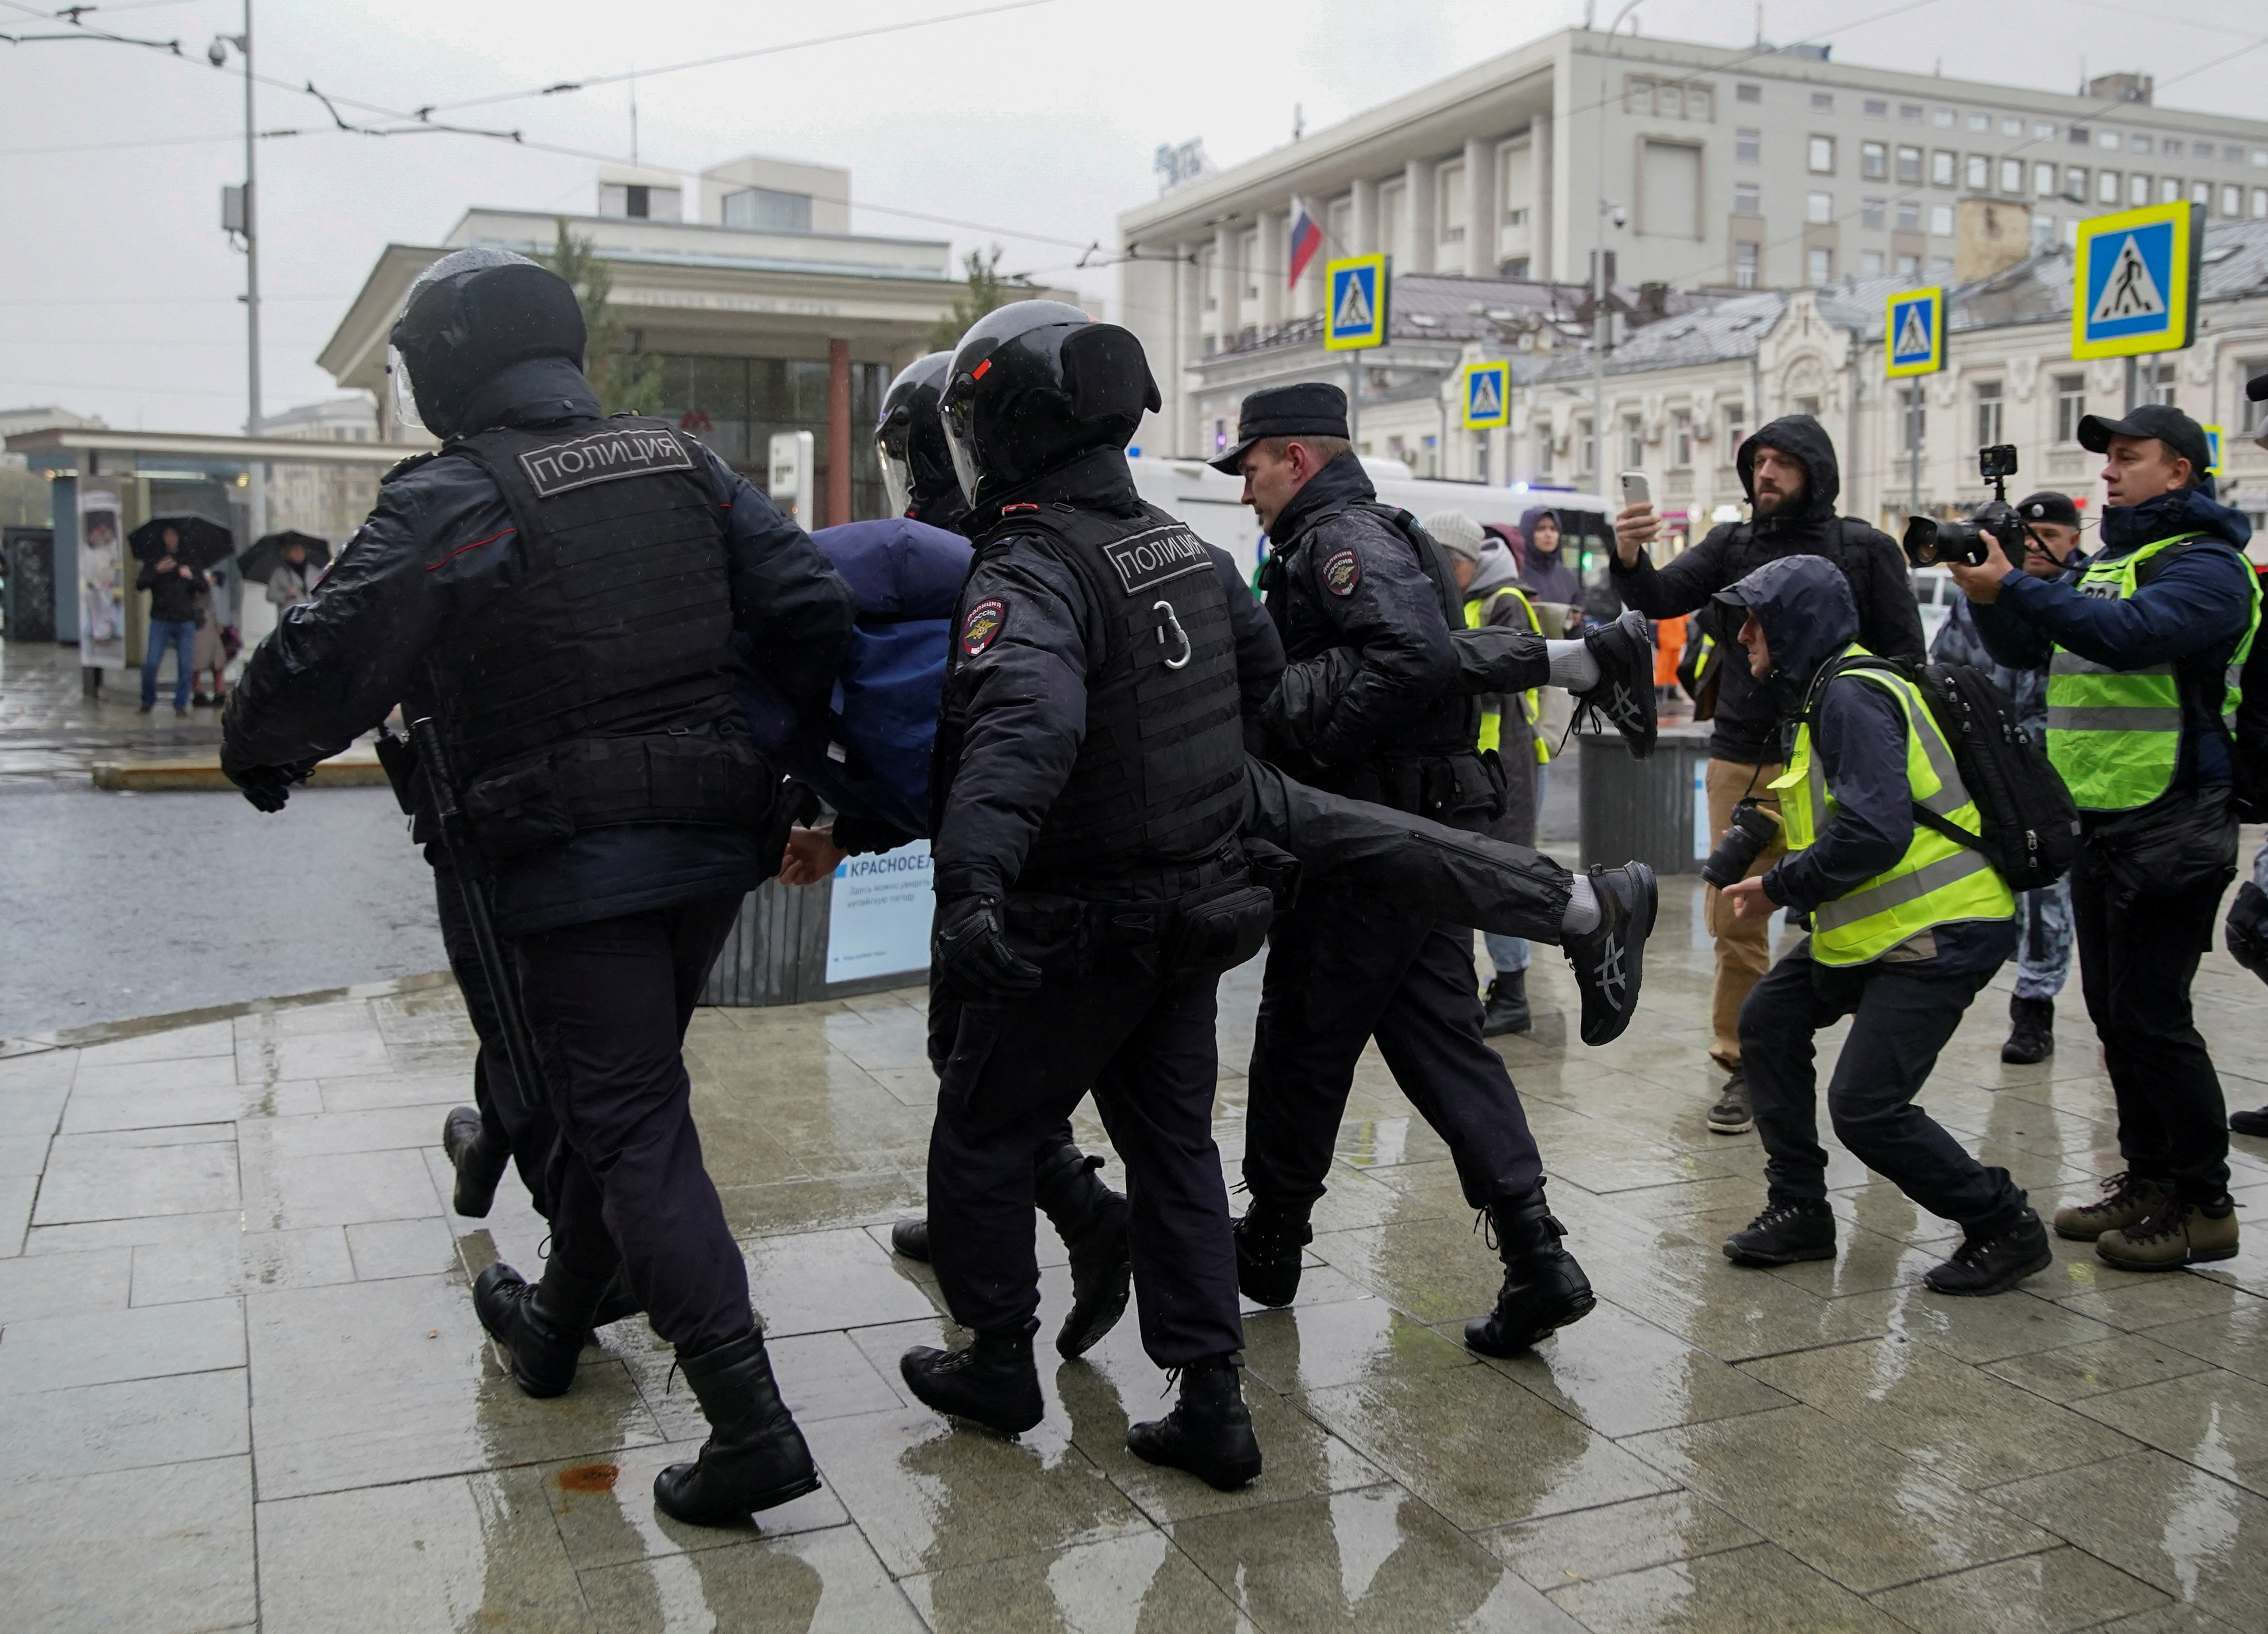 Russian police officers detain a person during a rally in Moscow